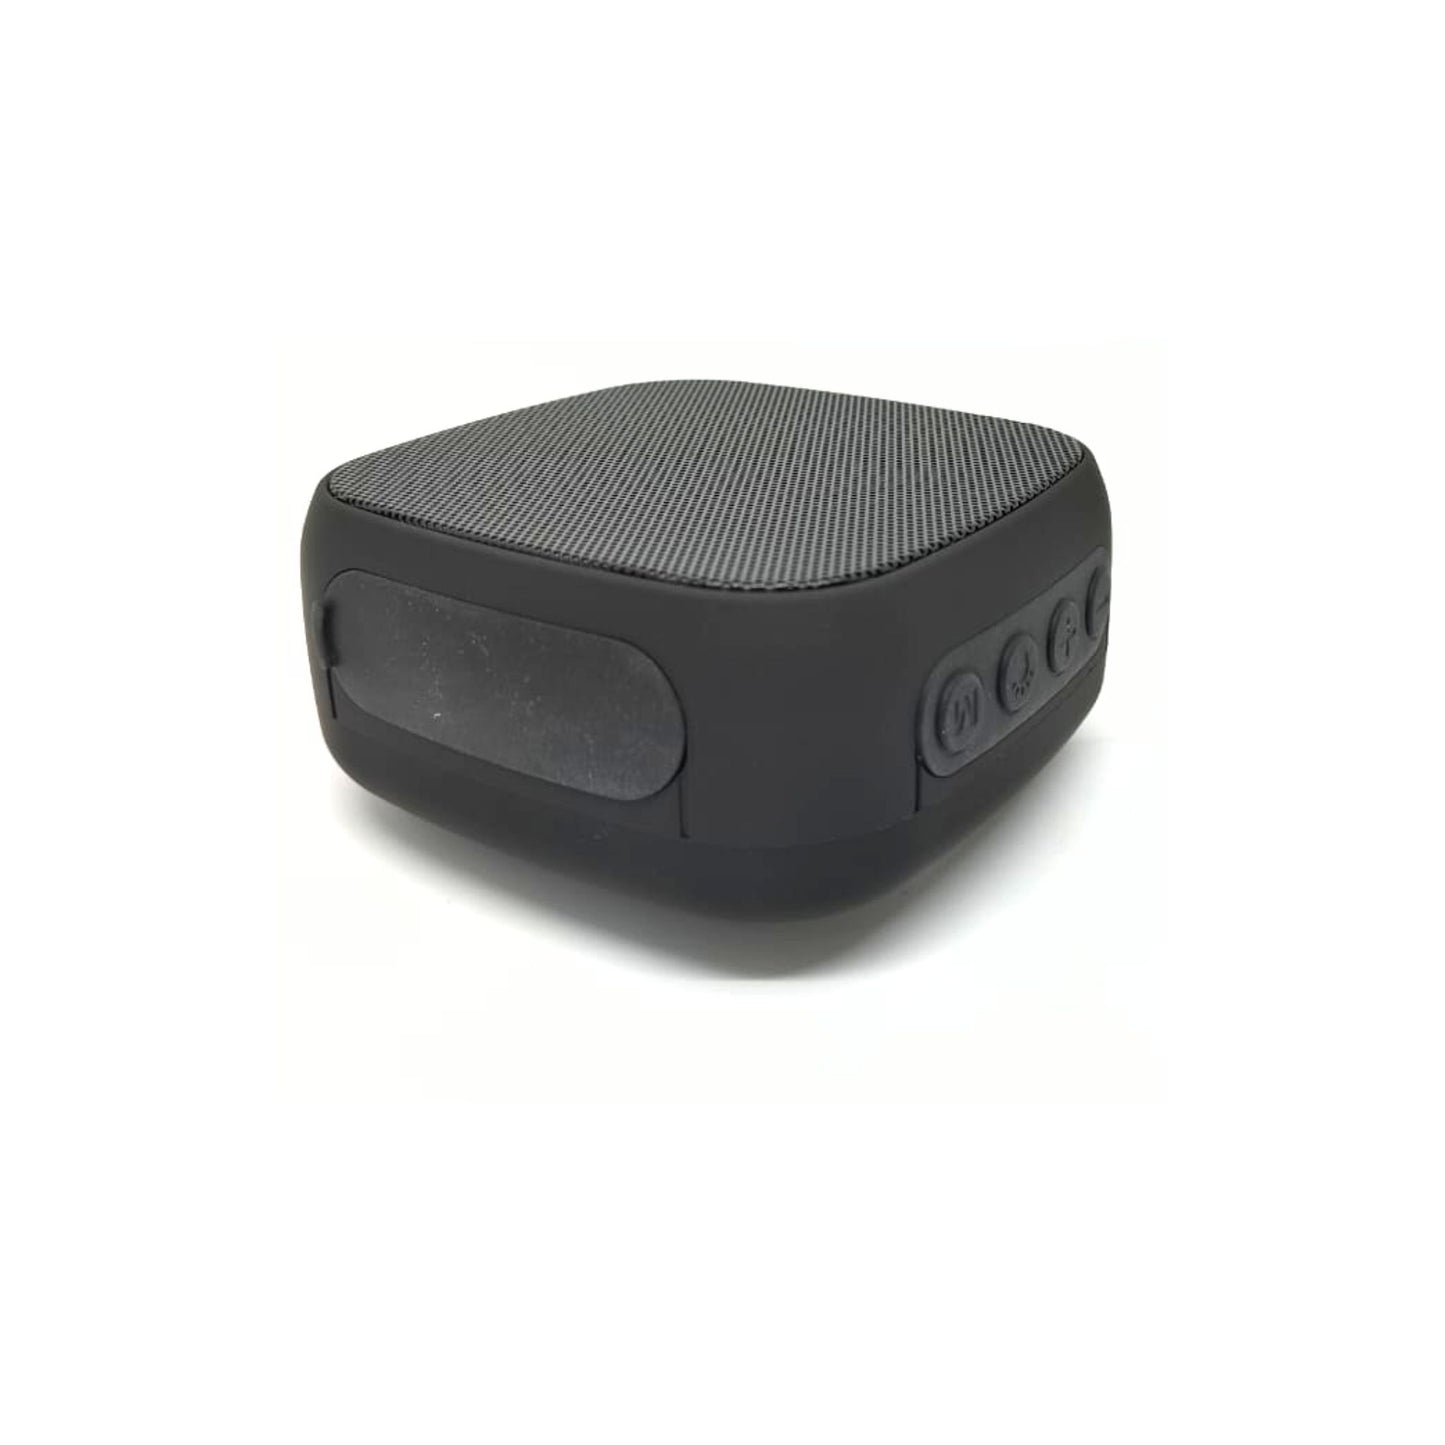 Handlebar Bluetooth Speaker for Riding, Bicycle